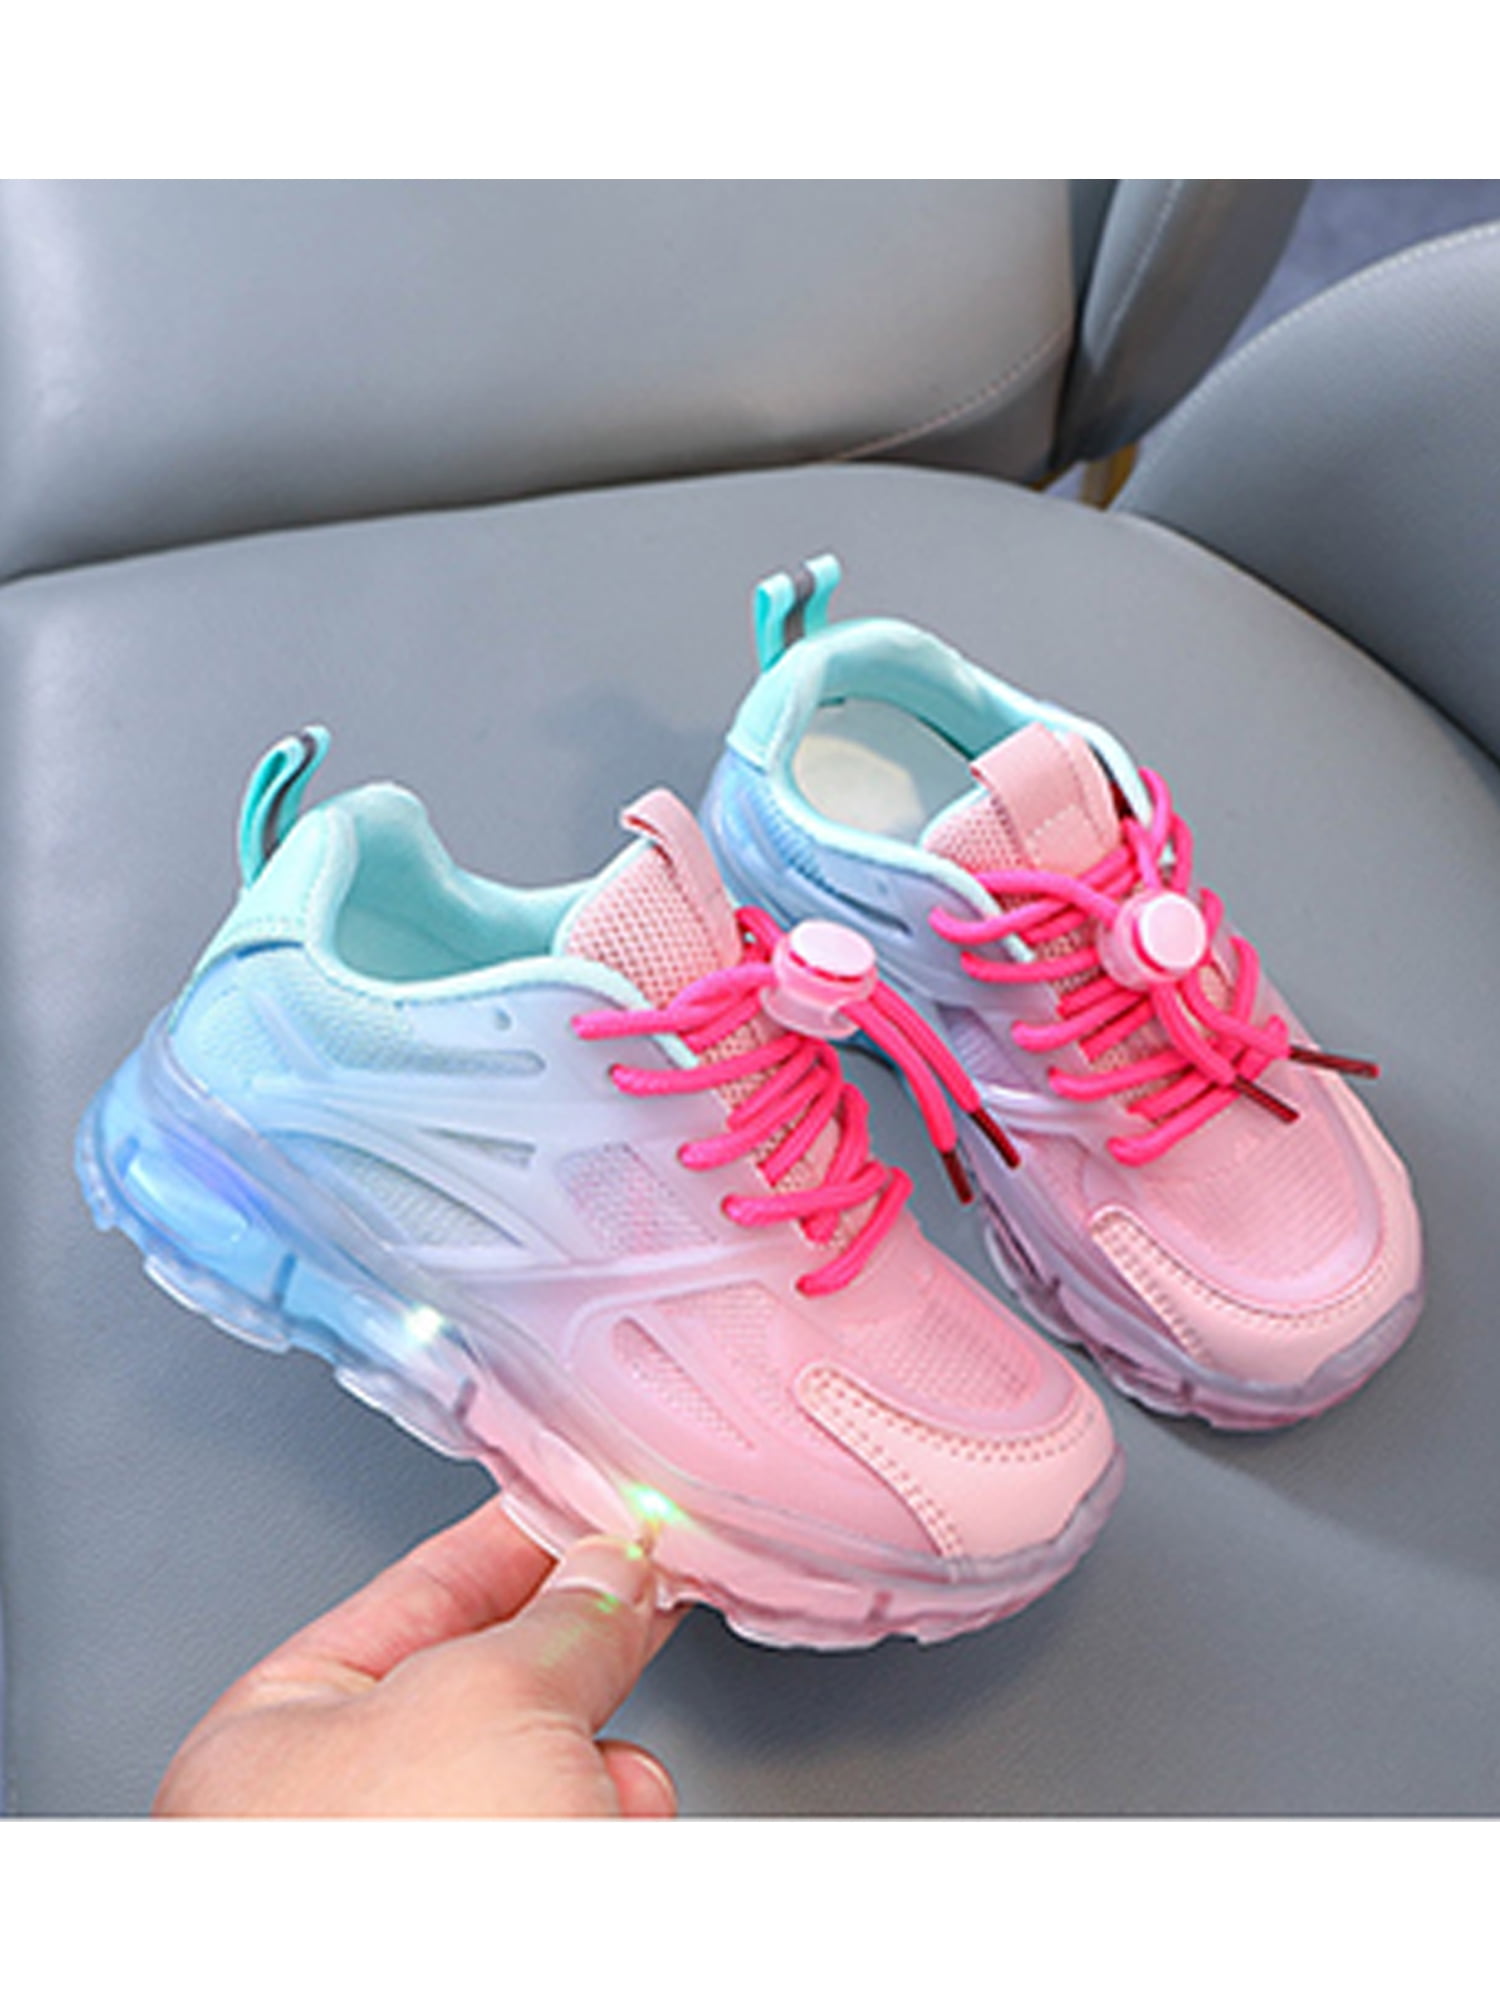 SIMANLAN Kids Sneakers Comfort Breathable Boys Athletic Running Shoe Fashion Children Pink Trainers 13C Shoes Sport Girls